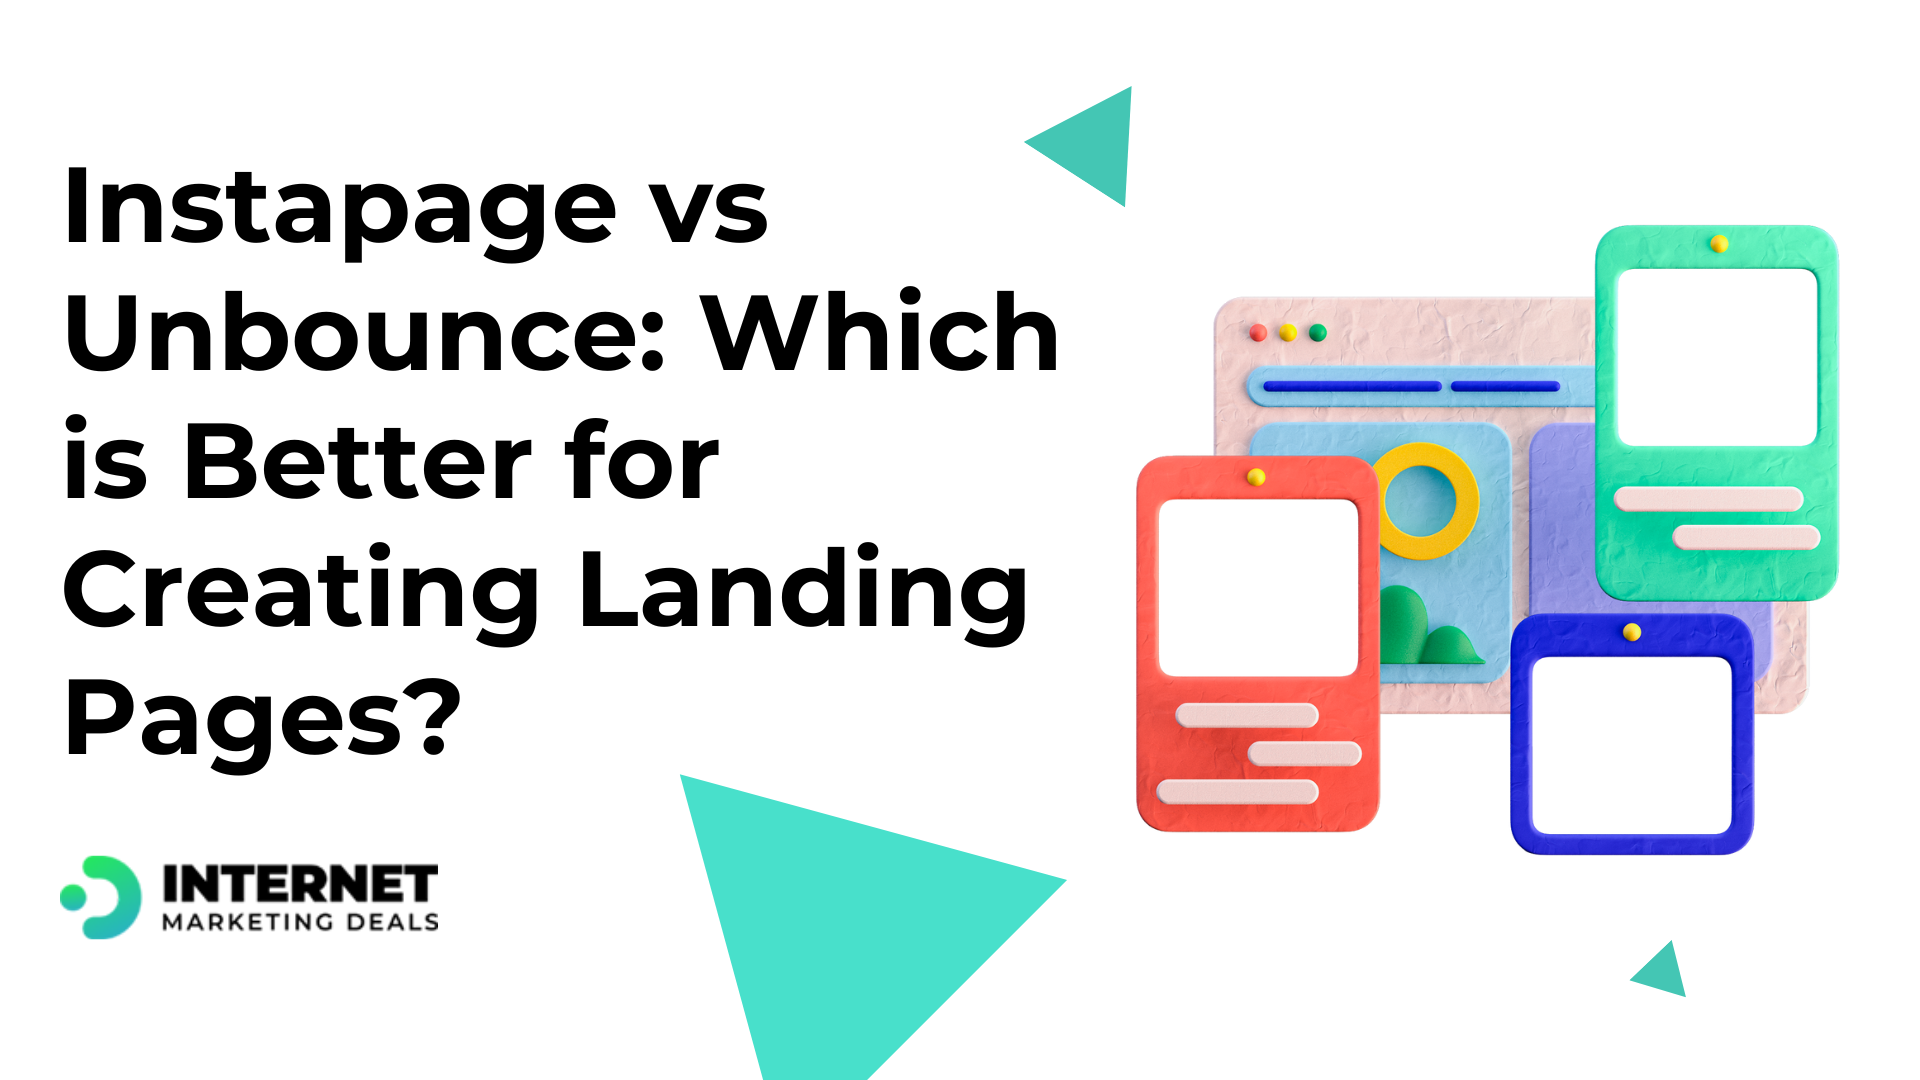 Instapage vs Unbounce: Which is Better for Creating Landing Pages?